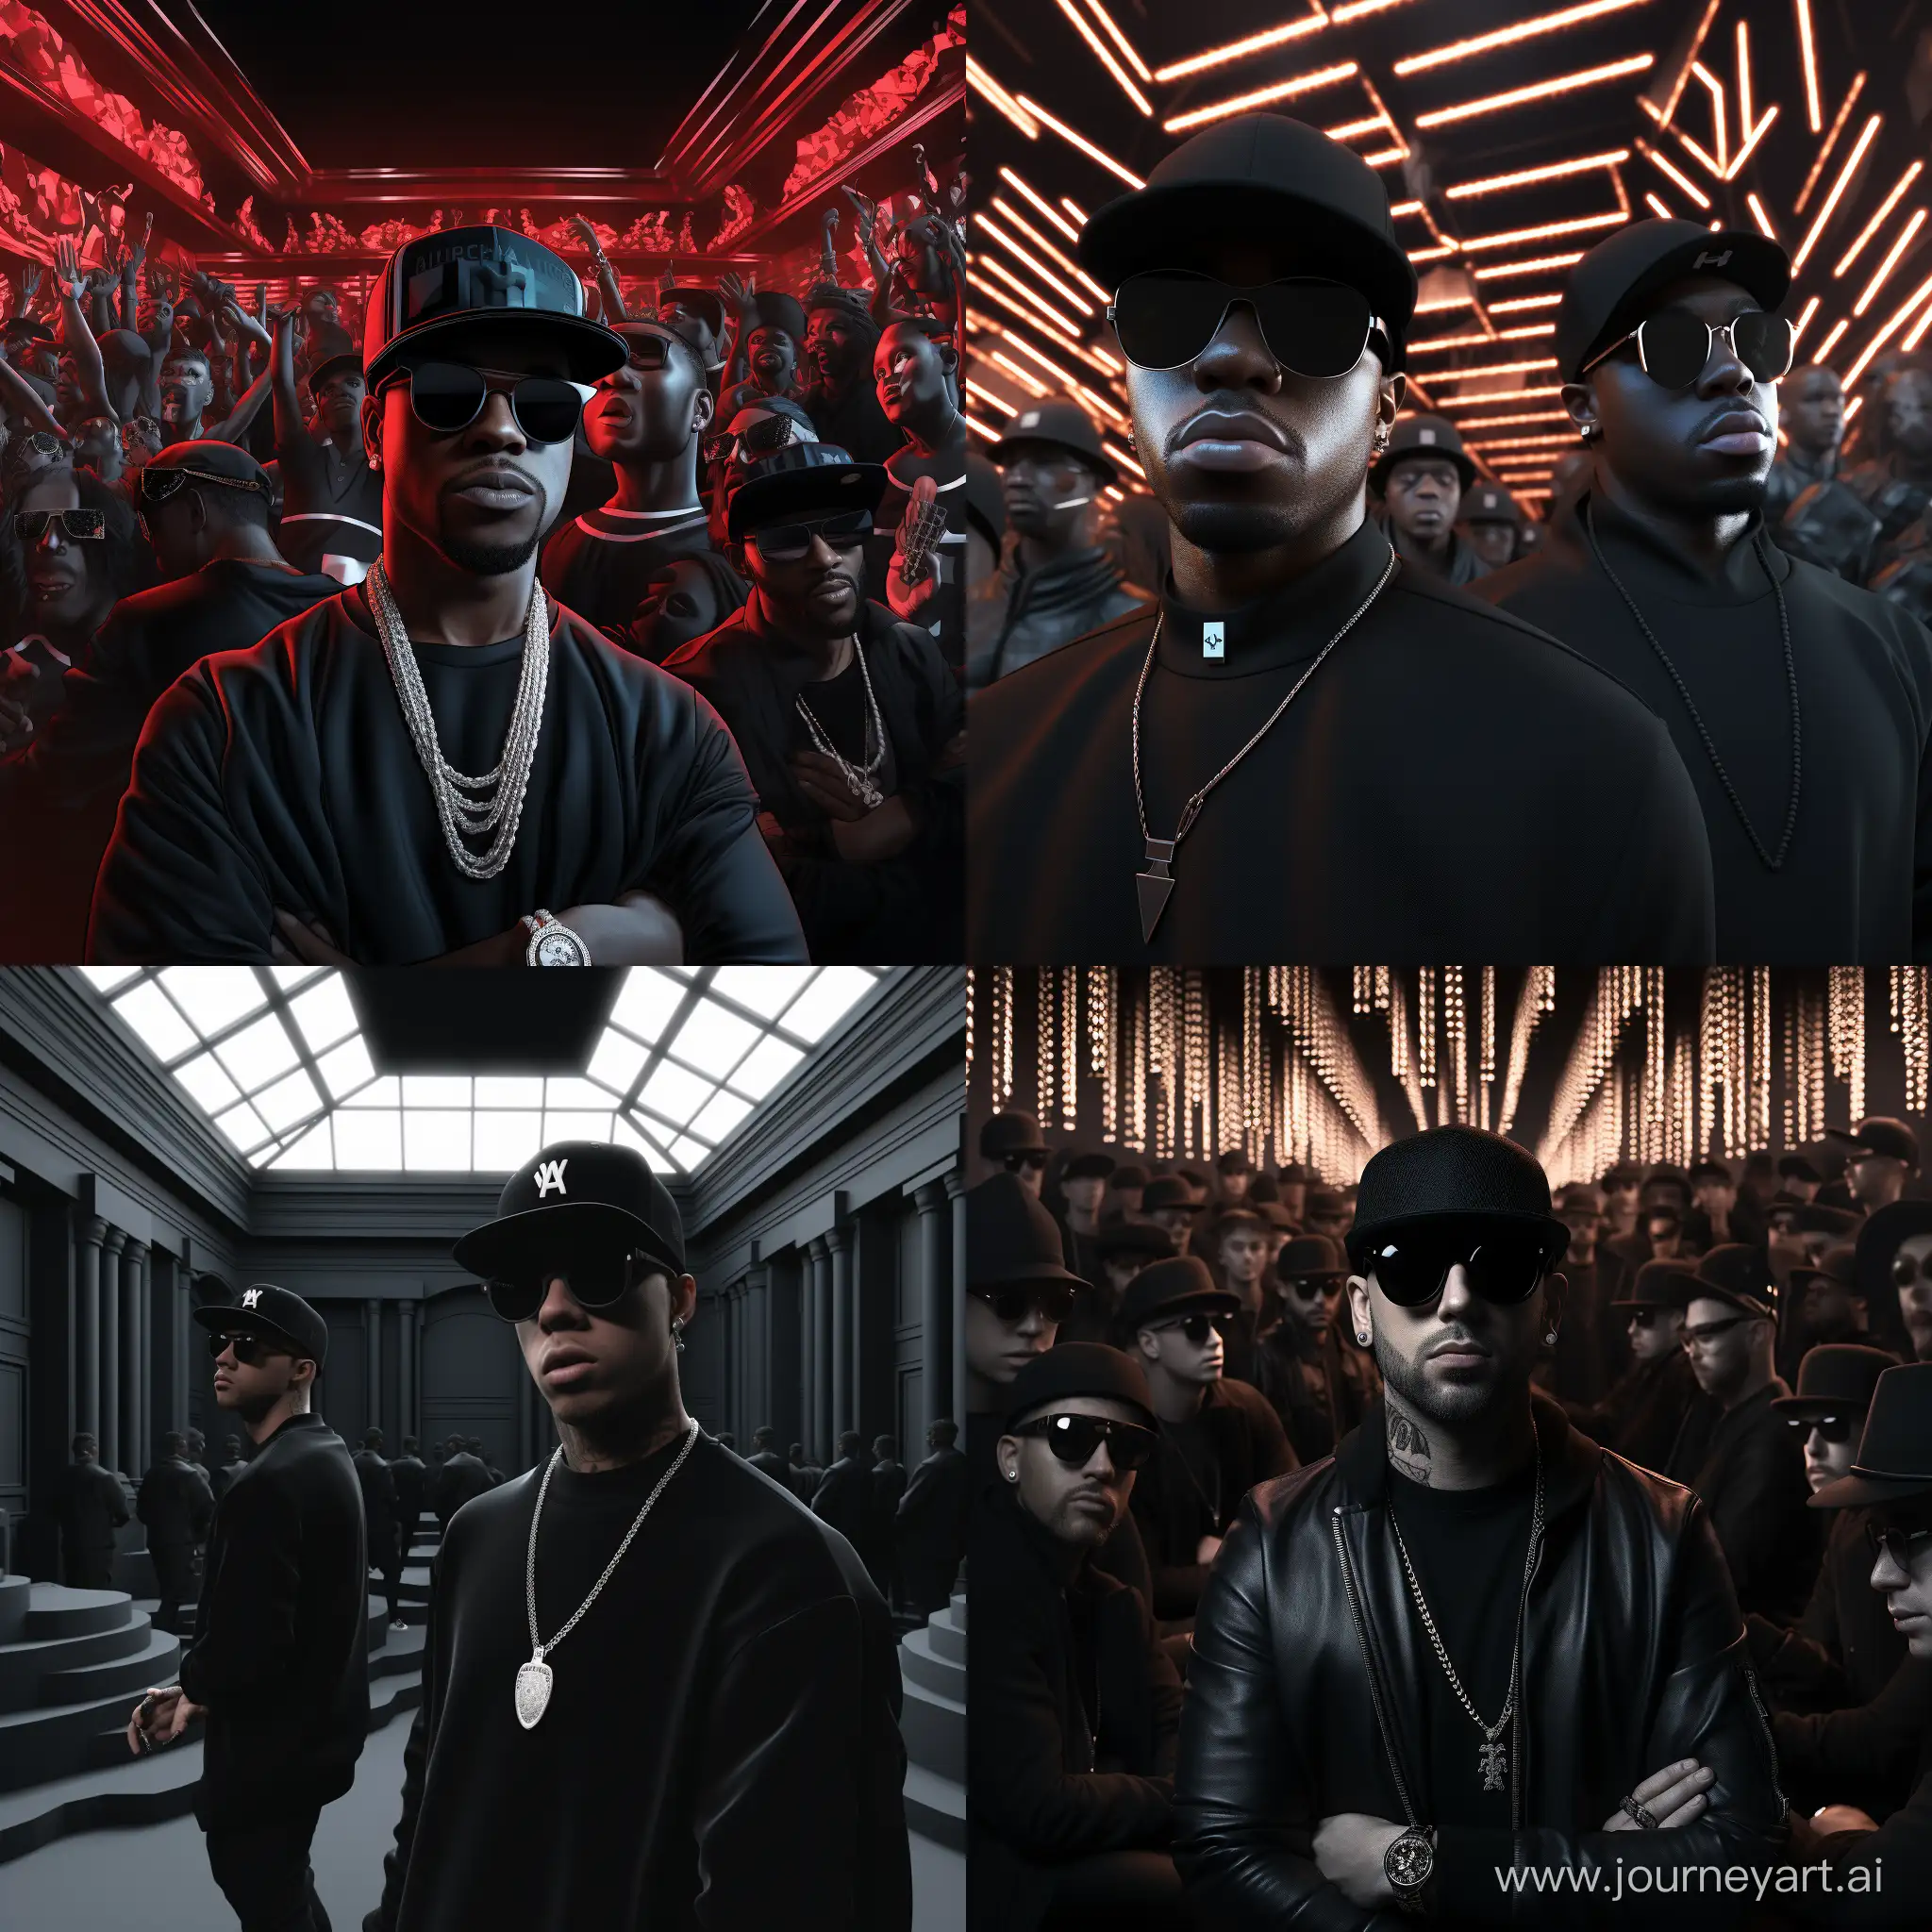 Stylish-White-Rappers-at-Nightclub-Entrance-in-3D